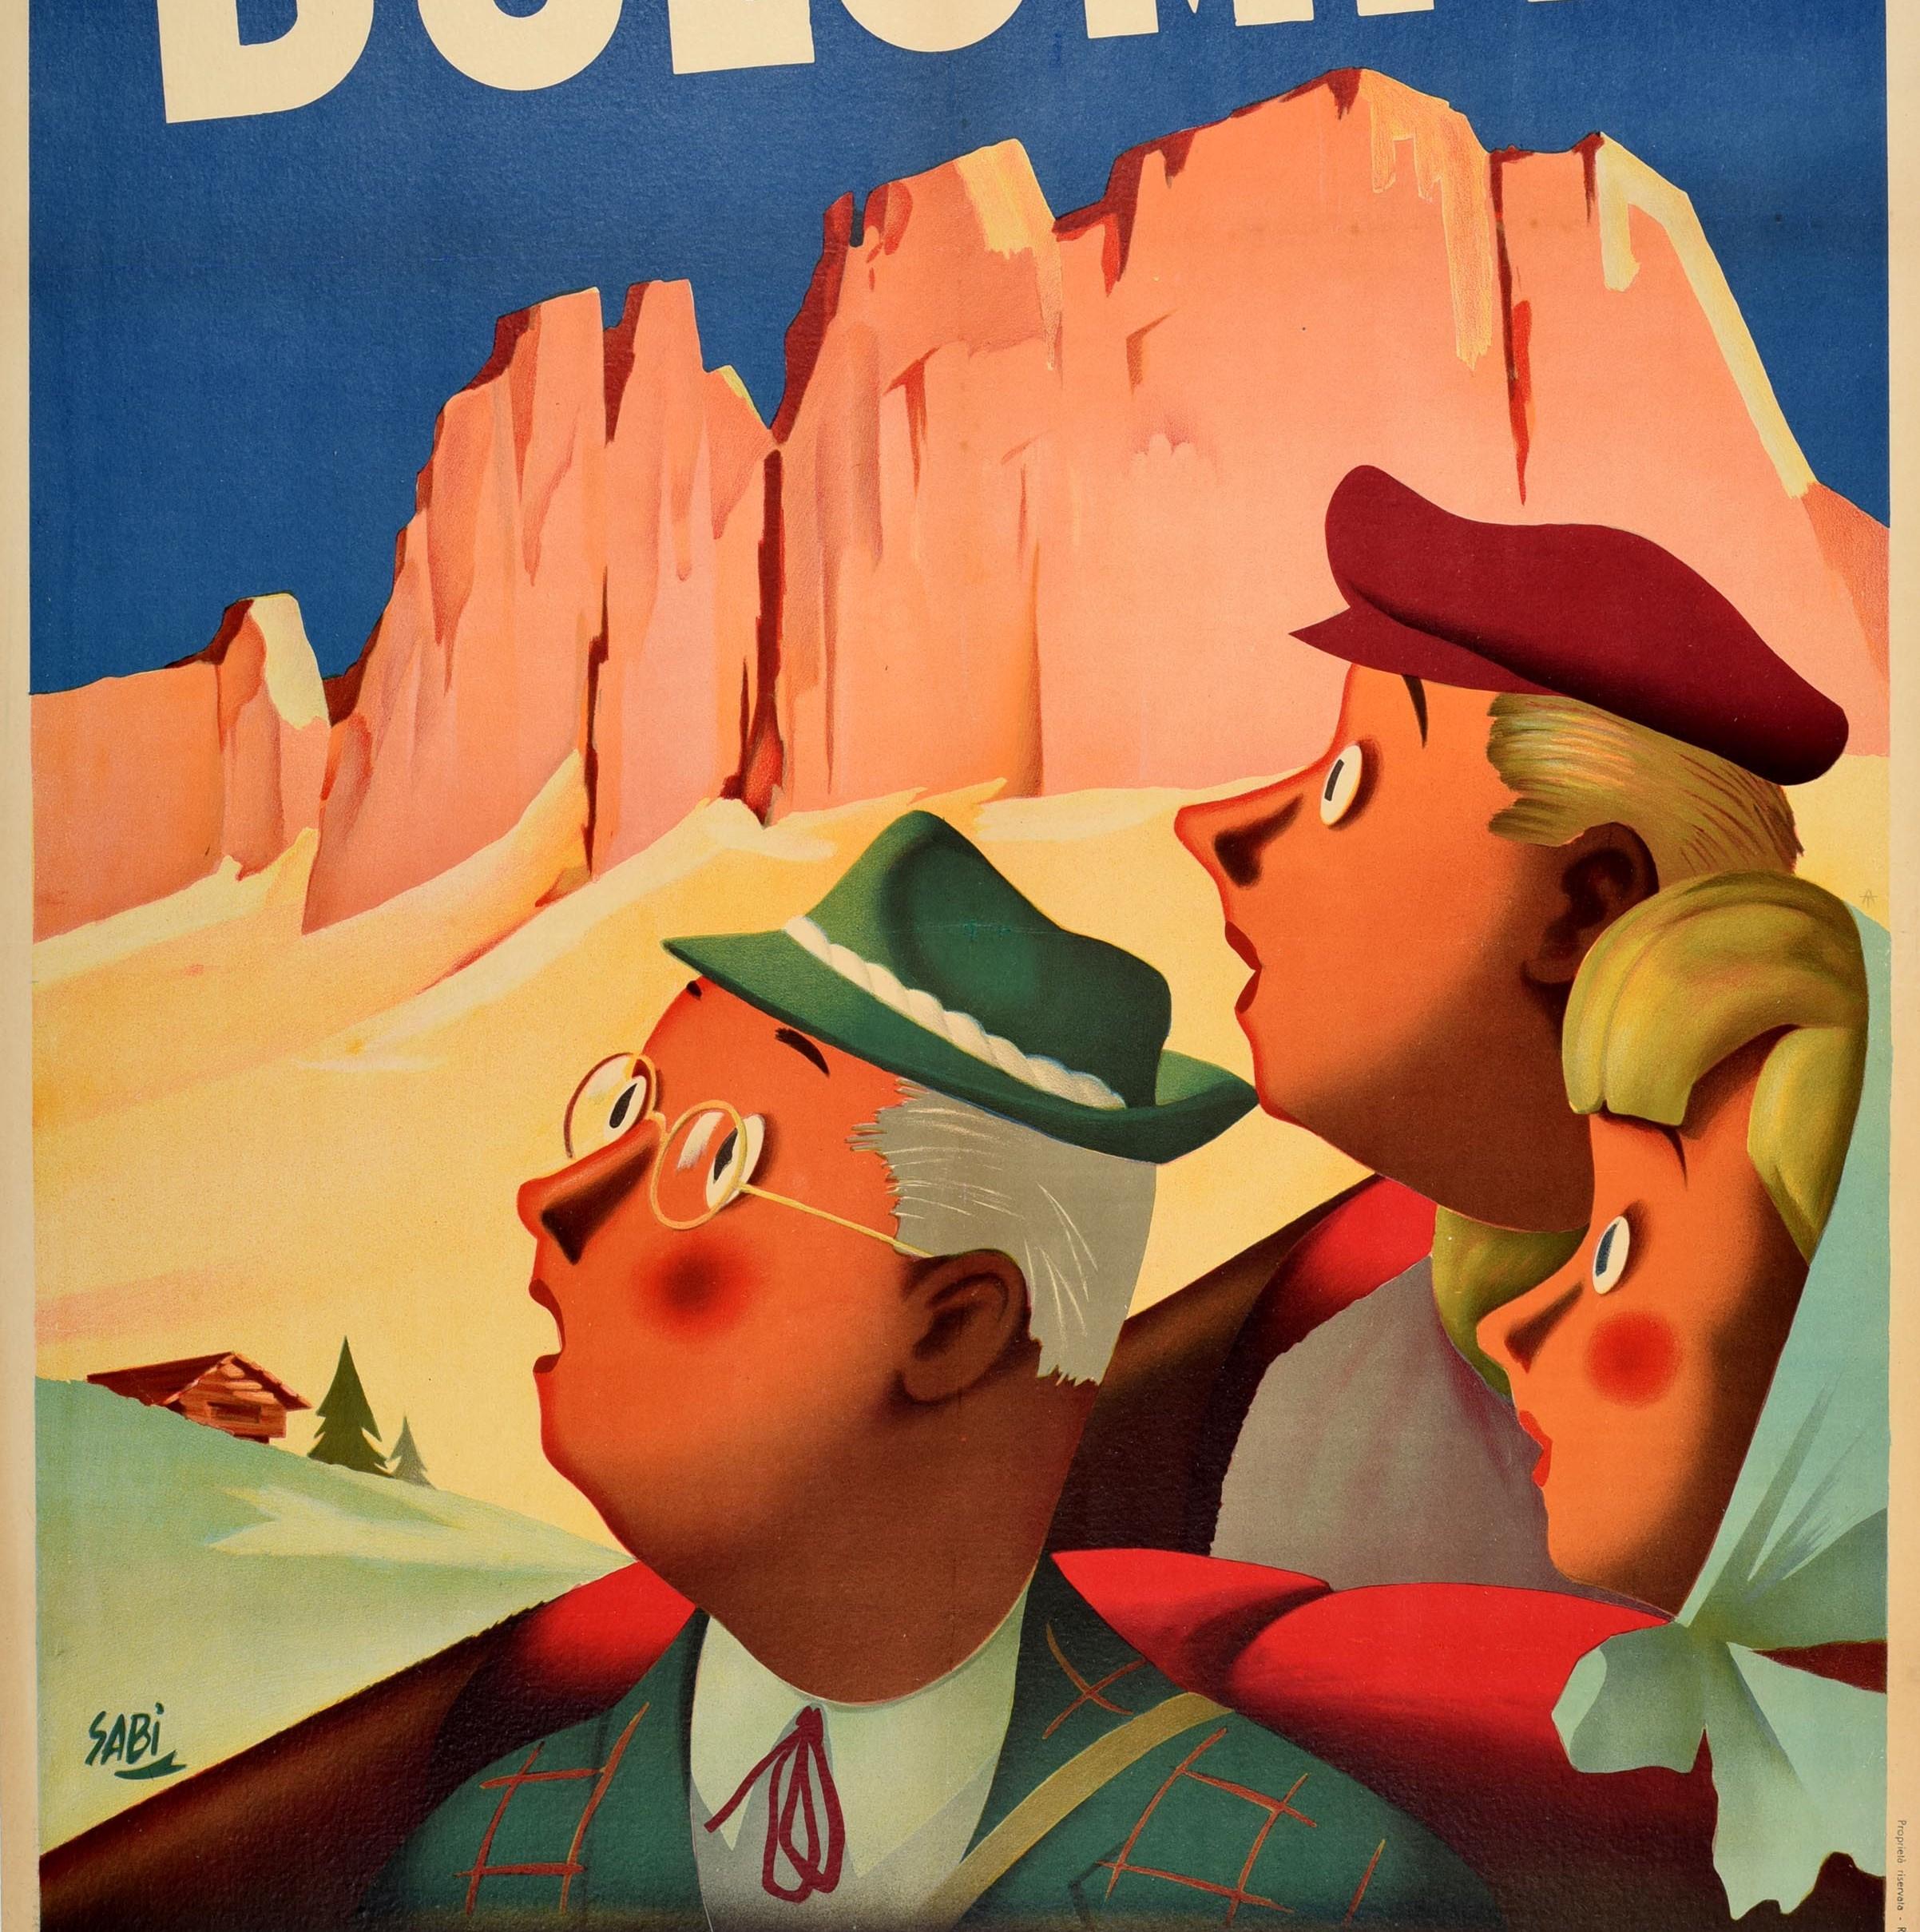 Original vintage travel poster for The Dolomites / Dolomiti in Italy - Design features a family of tourists looking on in awe at the Dolomites mountain range in northeastern Italy (part of the Southern Alps) There is a log cabin and trees at the